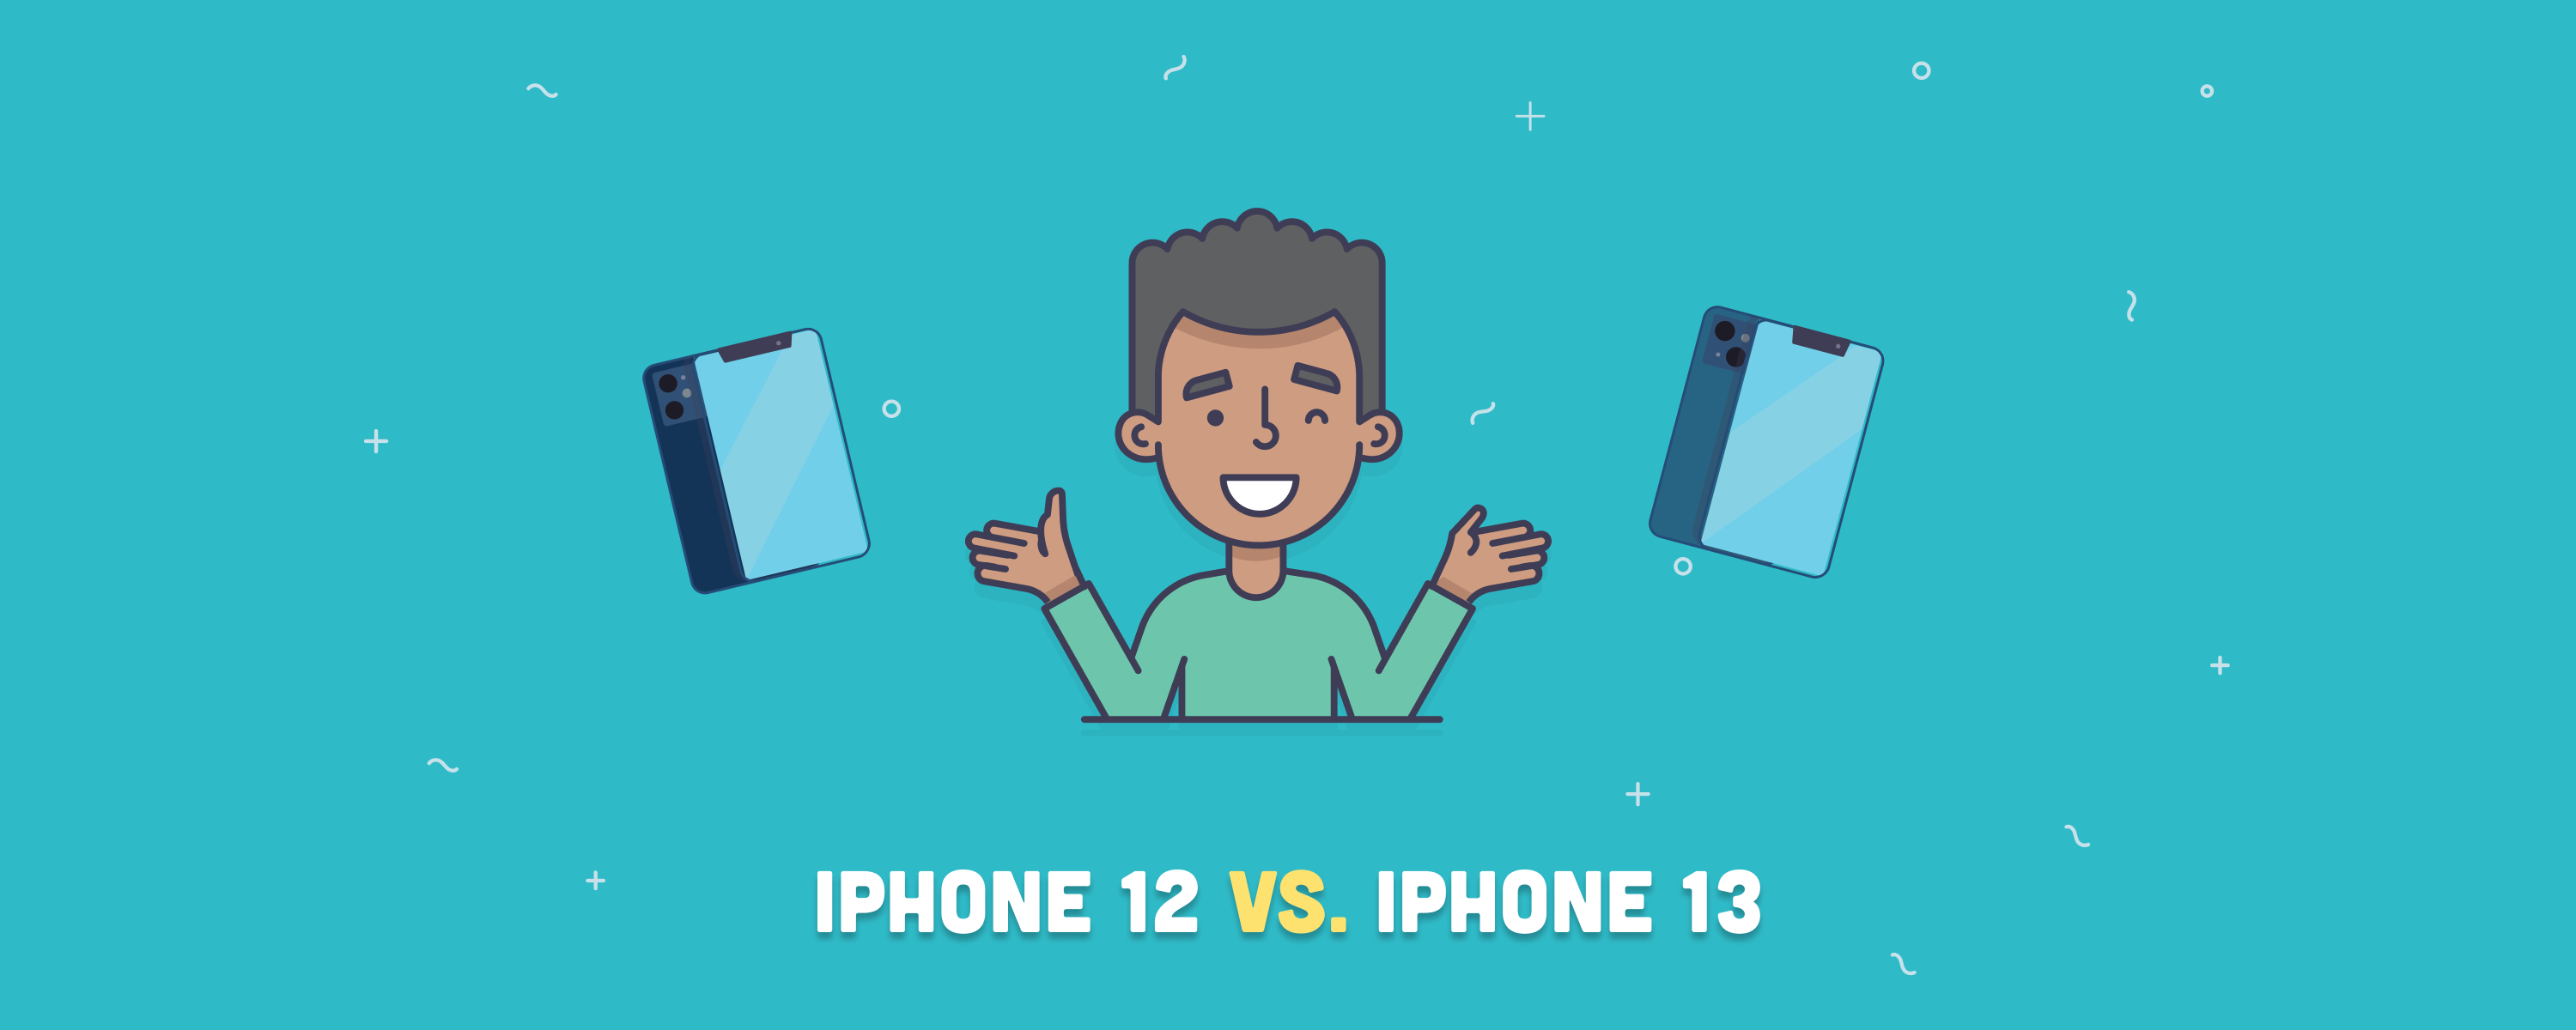 iPhone 12 vs. iPhone 13: Comparison and Differences